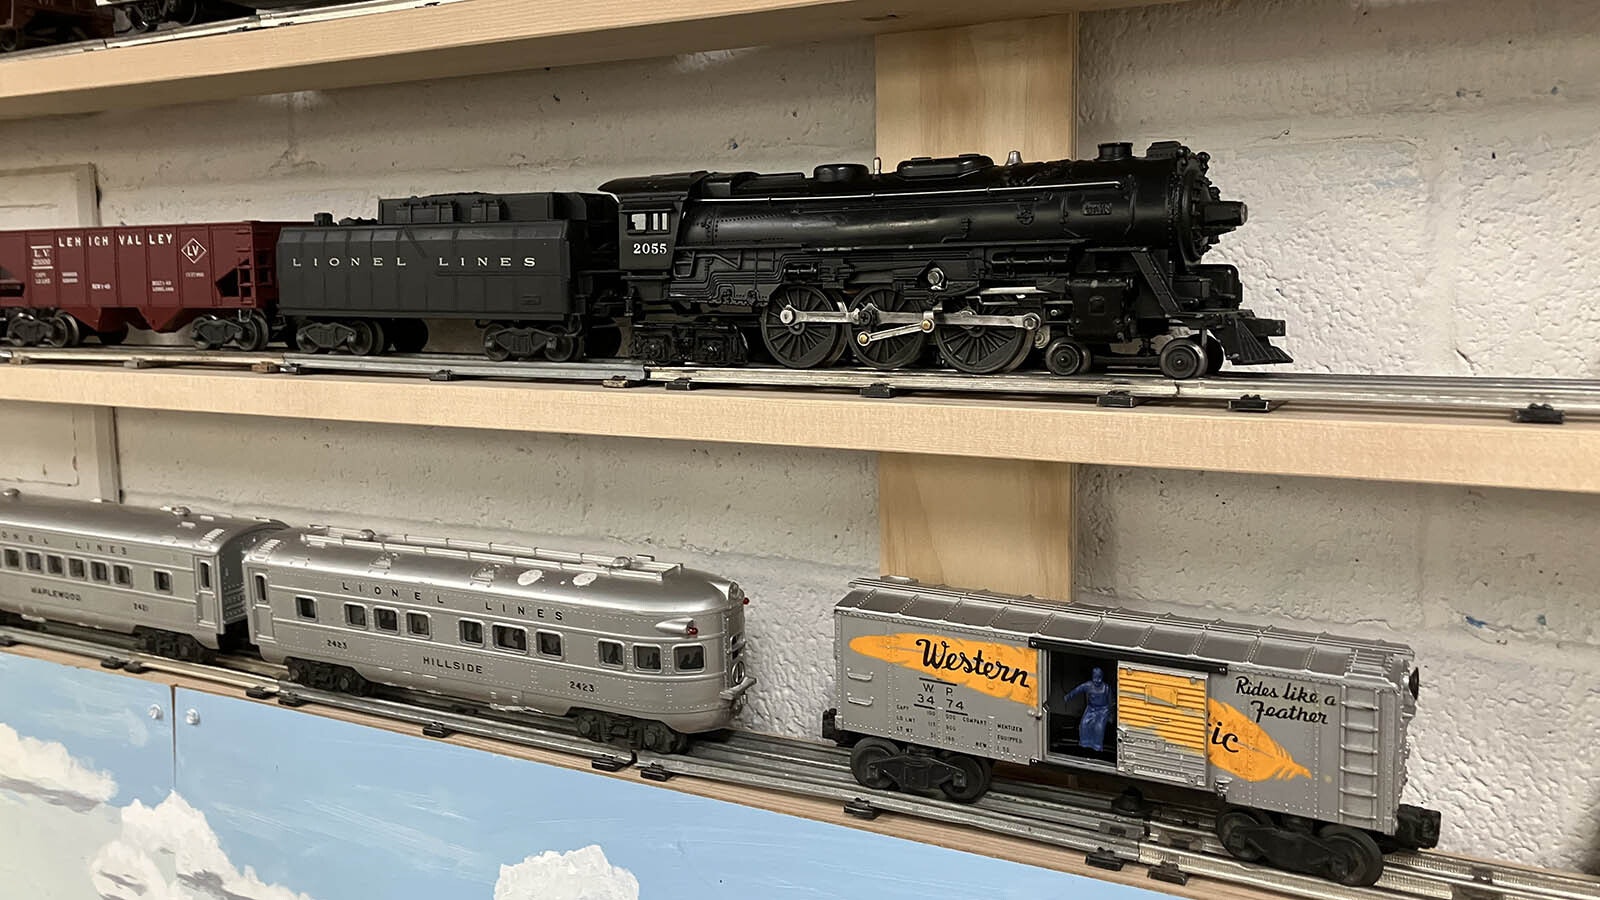 Lionel trains in the O-gauge were a big part of pre-war and Baby Boomer’s toys around the Christmas tree. These are part of the club’s collection.